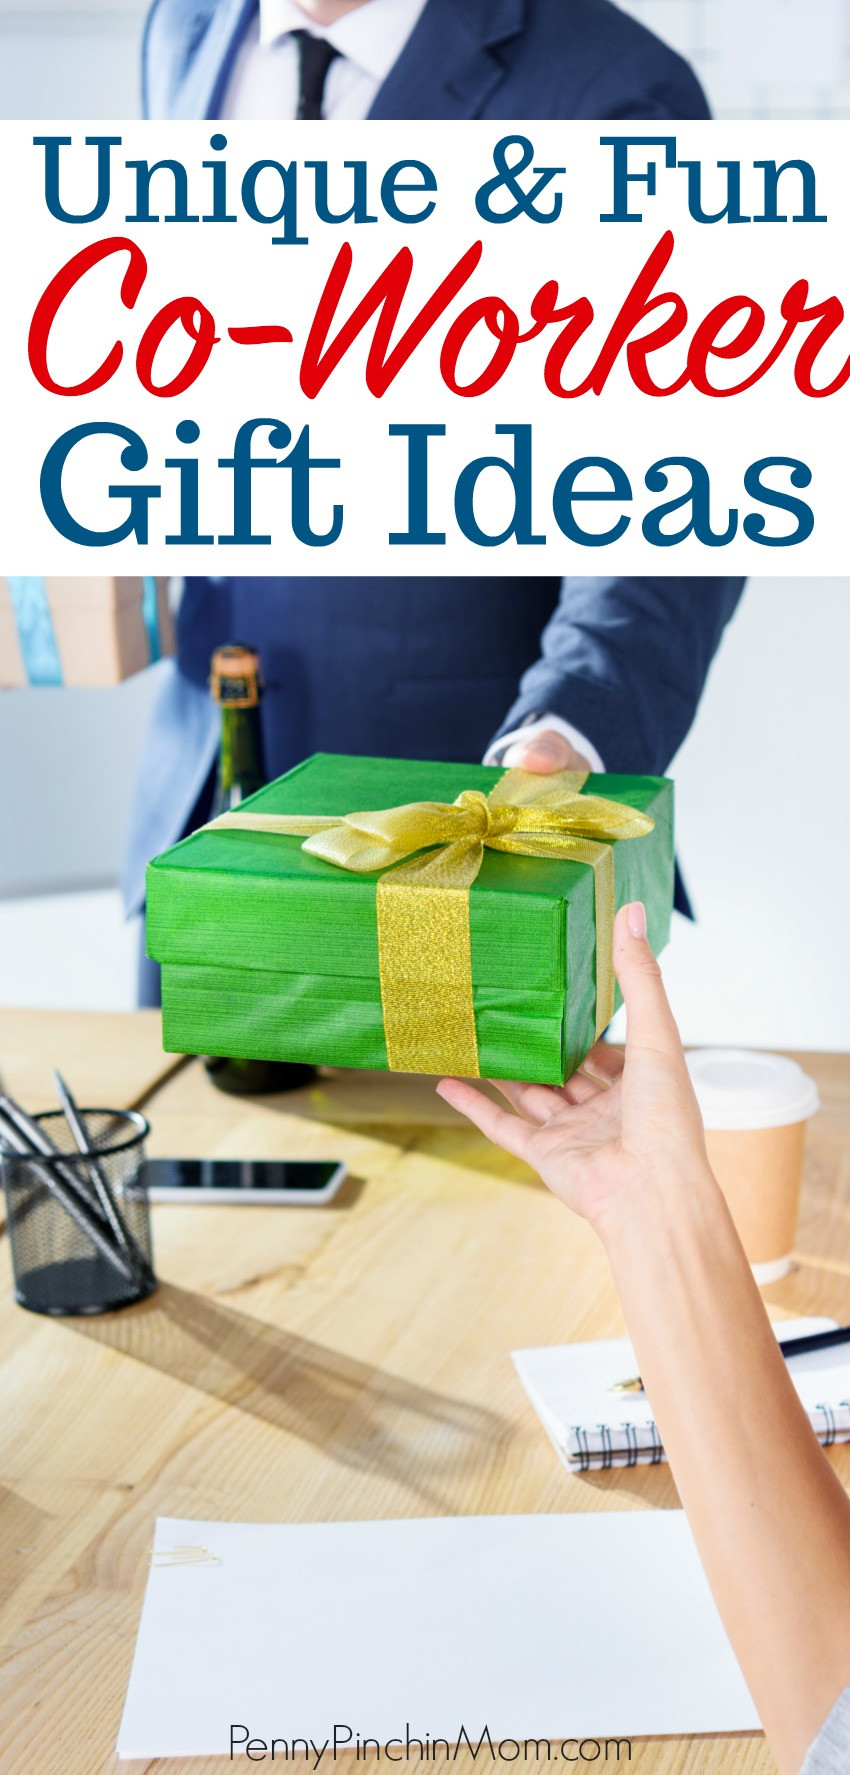 Employee Holiday Gift Ideas Under 20
 Co Worker Gift Ideas for Anyone on Your List This Year